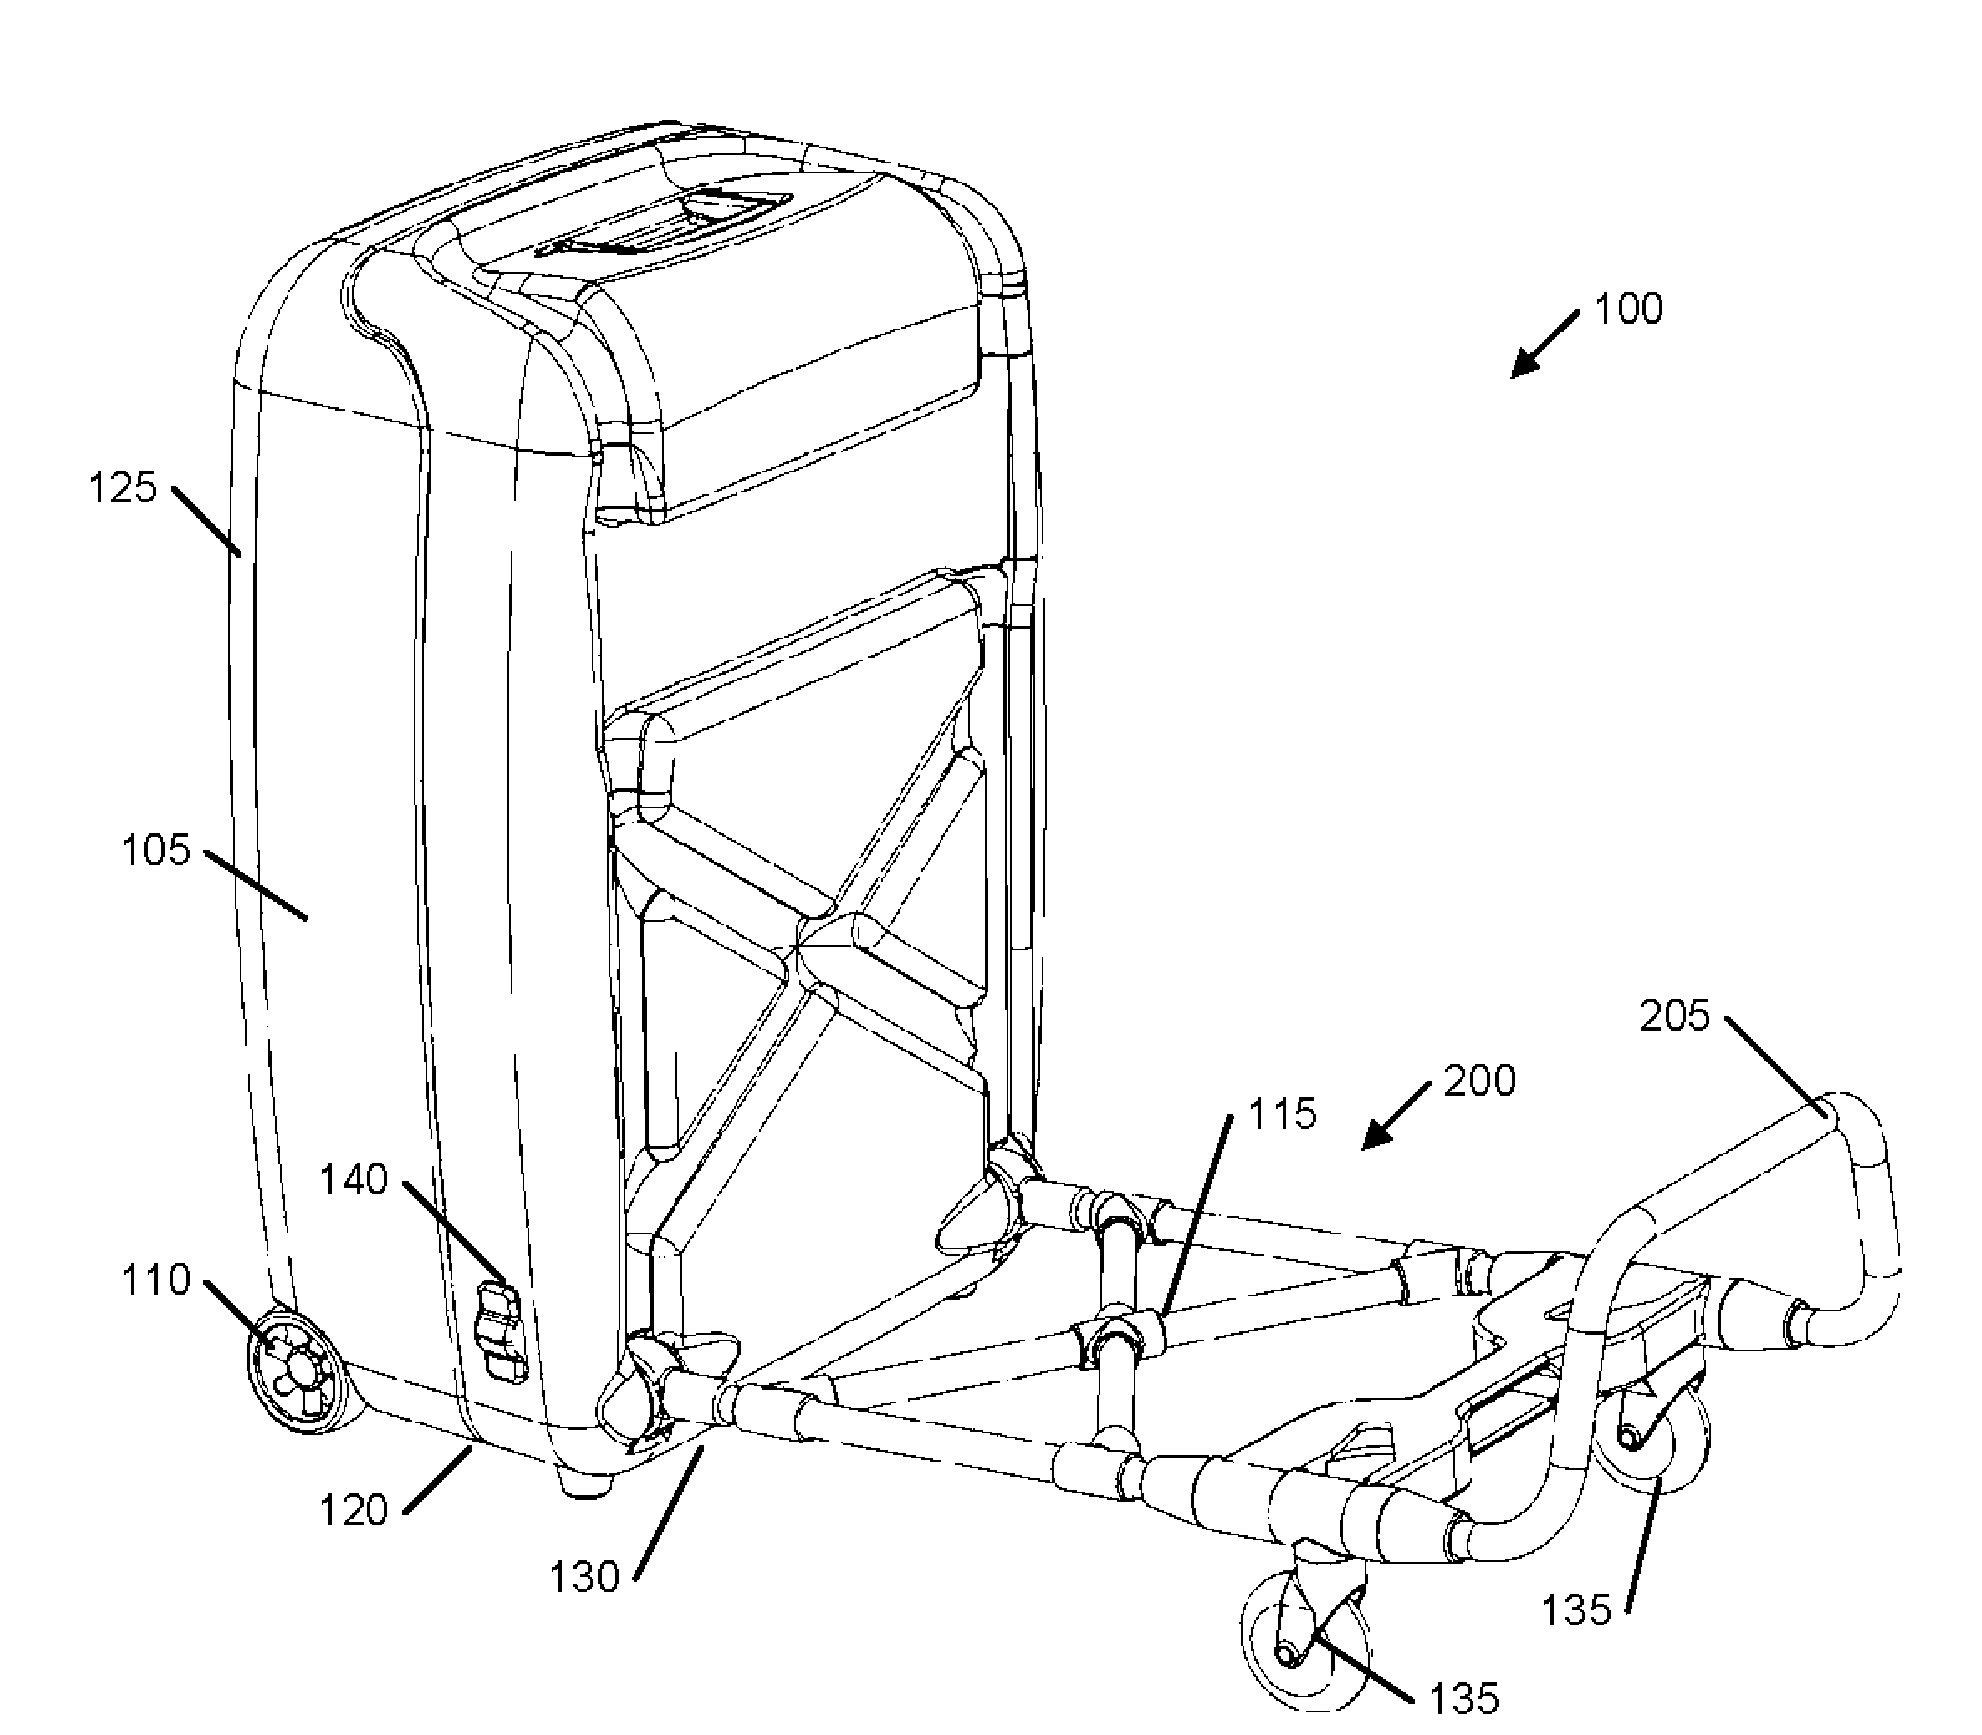 Apparatus and method for convertible cargo carrier